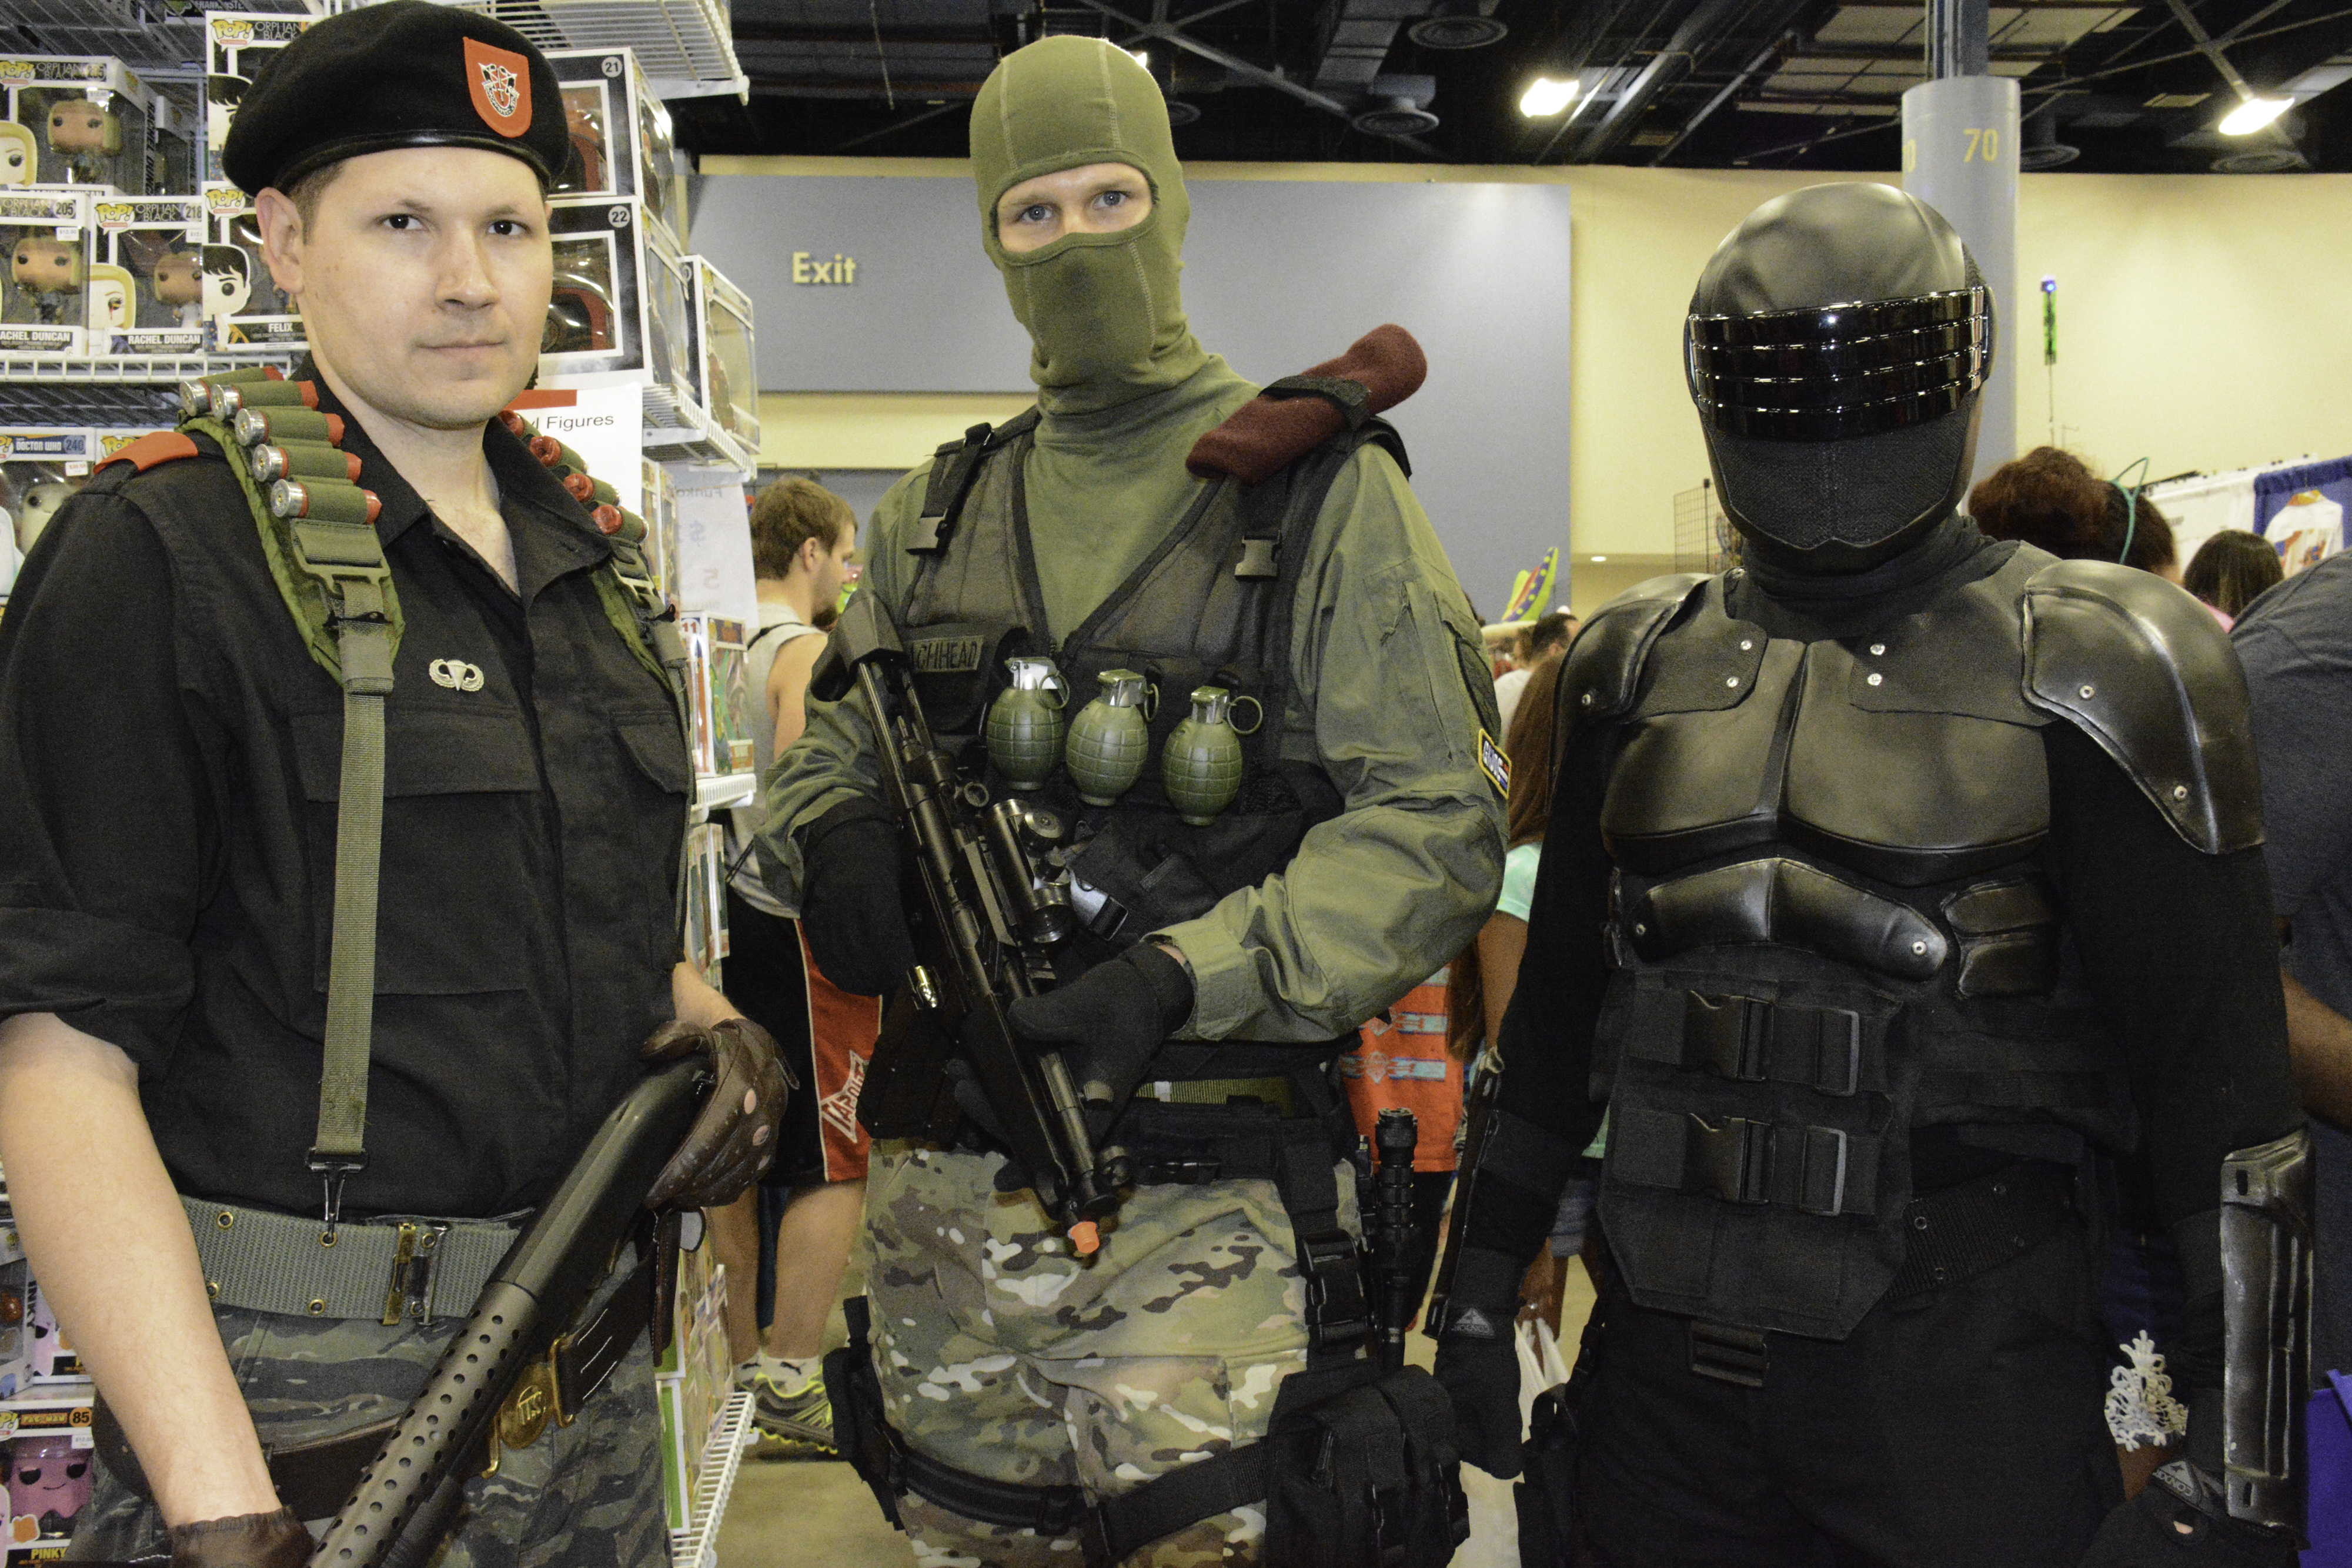 Cosplayers dressed as characters from G.I. Joe.